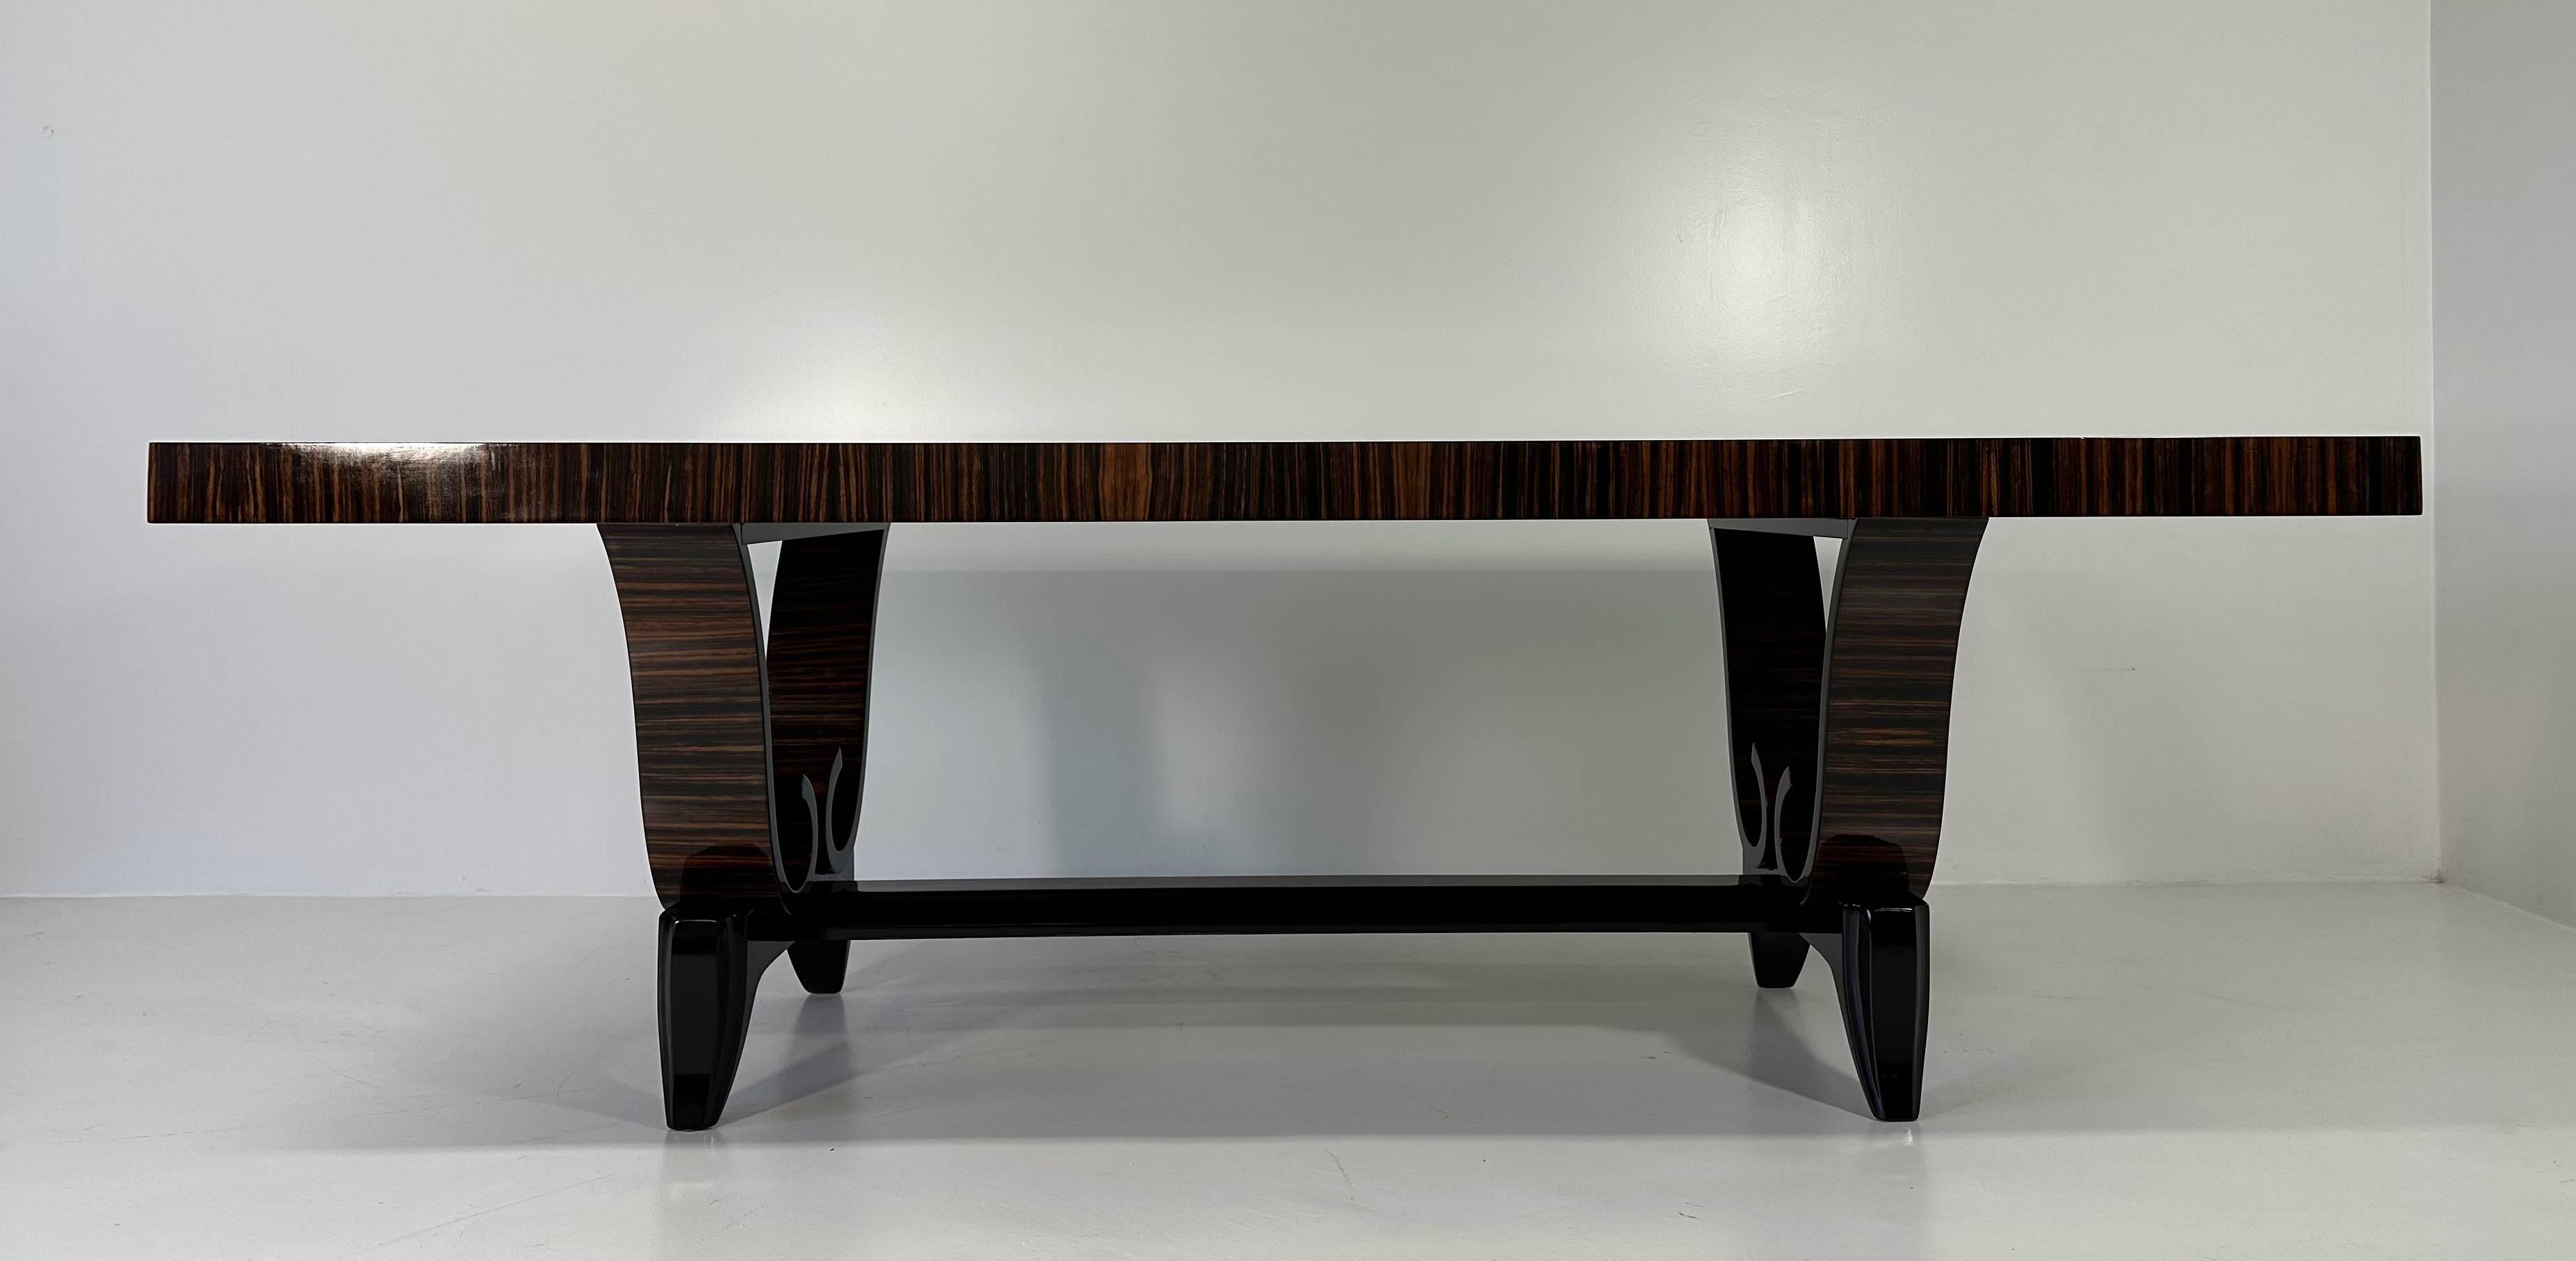 This Art Deco table was produced in France in the 1940s. 
It is completely made of Ebony and has black lacquered details.